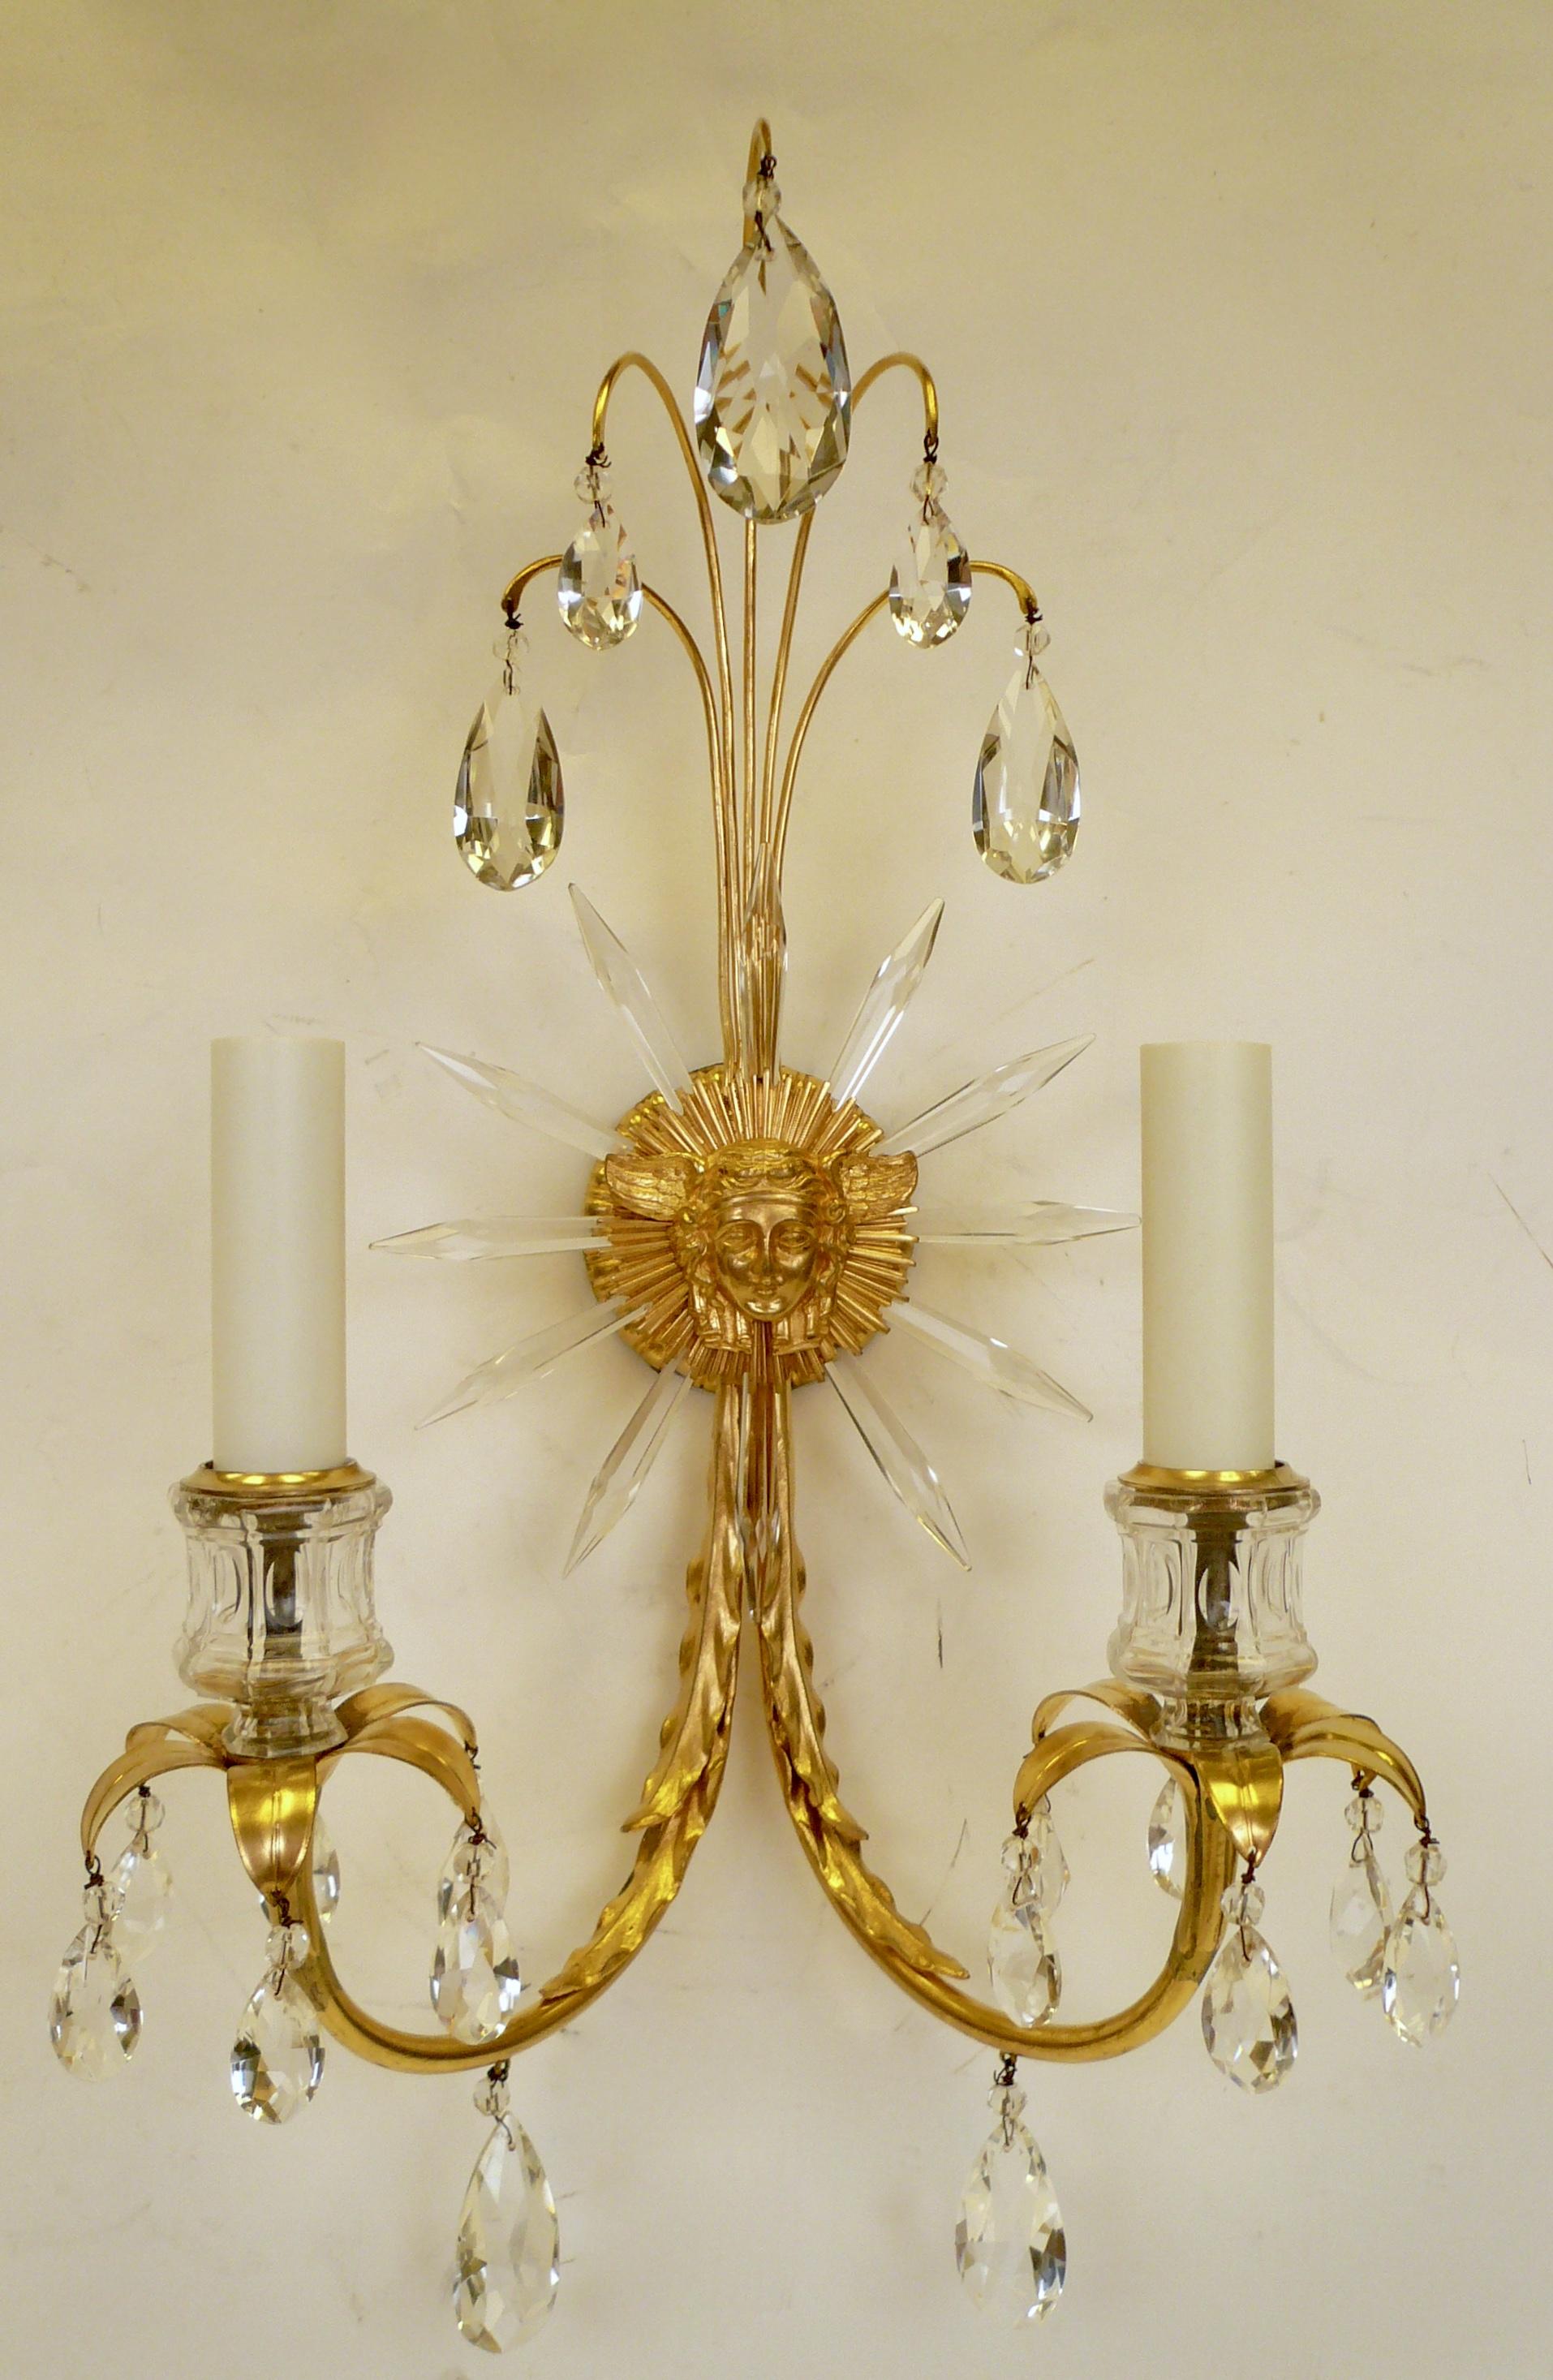 This beautifully detailed pair of Caldwell sconces feature Classical motifs including the winged head of the God Mercury, and acanthus leaves. They retain their original finish and crystal prisms.